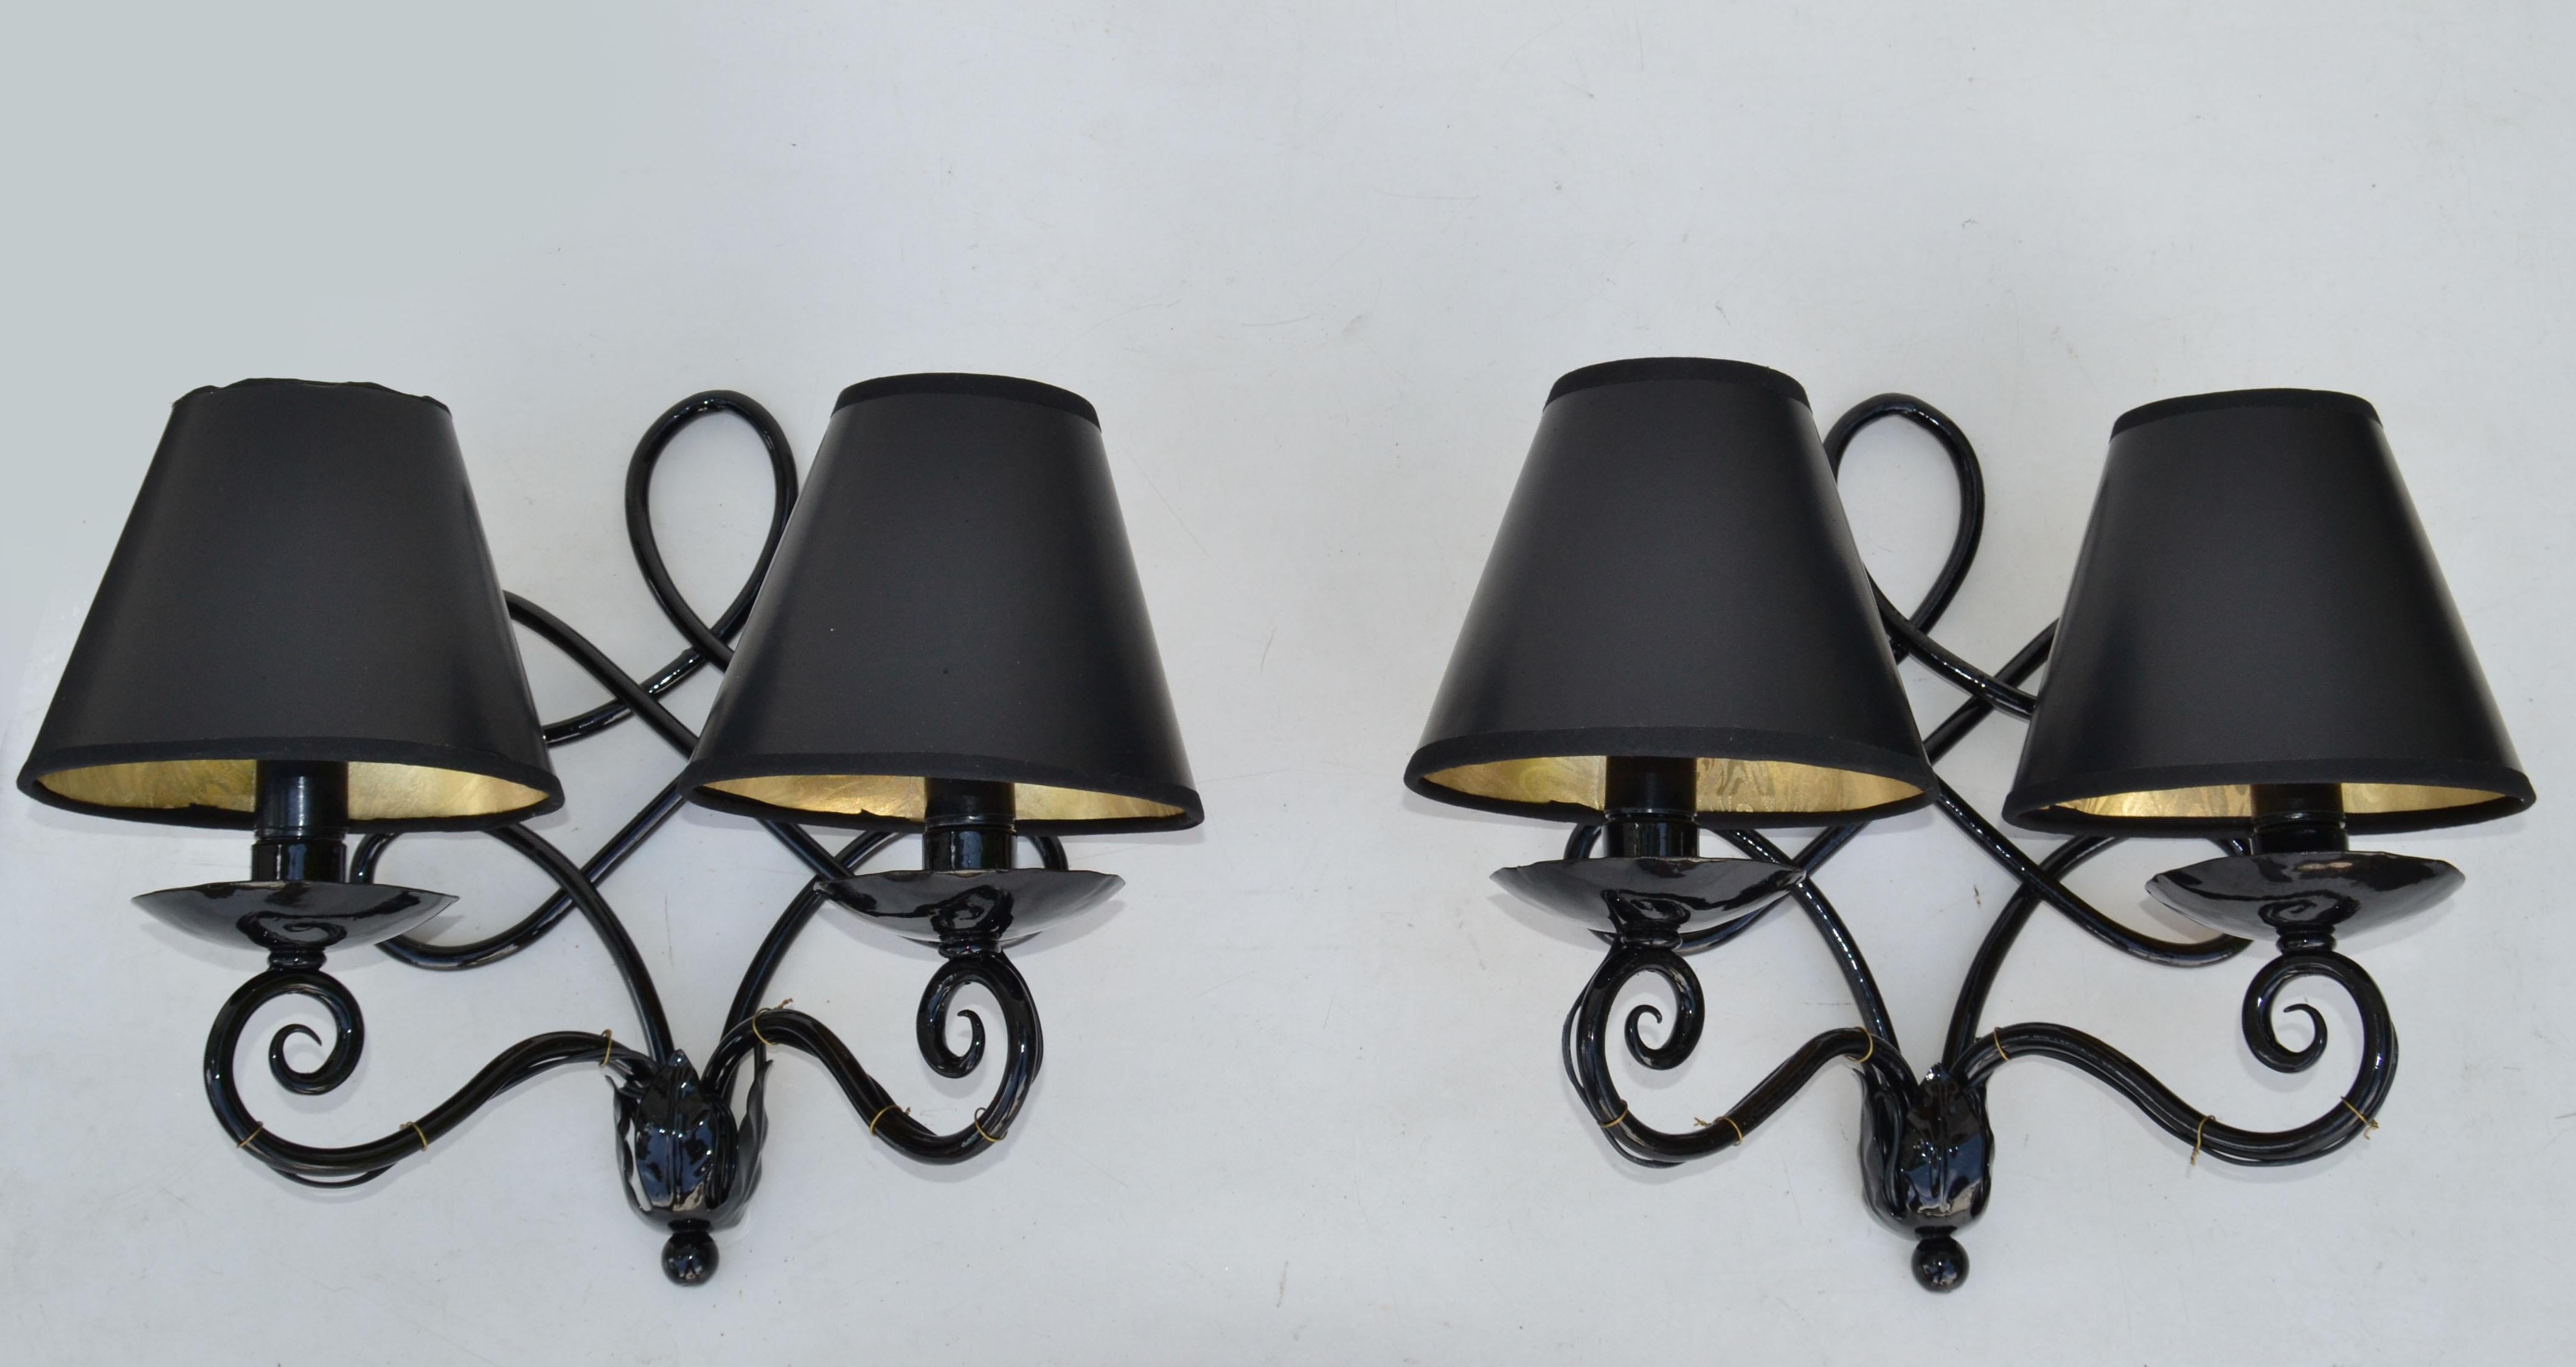 1940 French 2 Lights Wrought Iron Wall Sconces Black Gloss Finish Art Deco, Pair 10